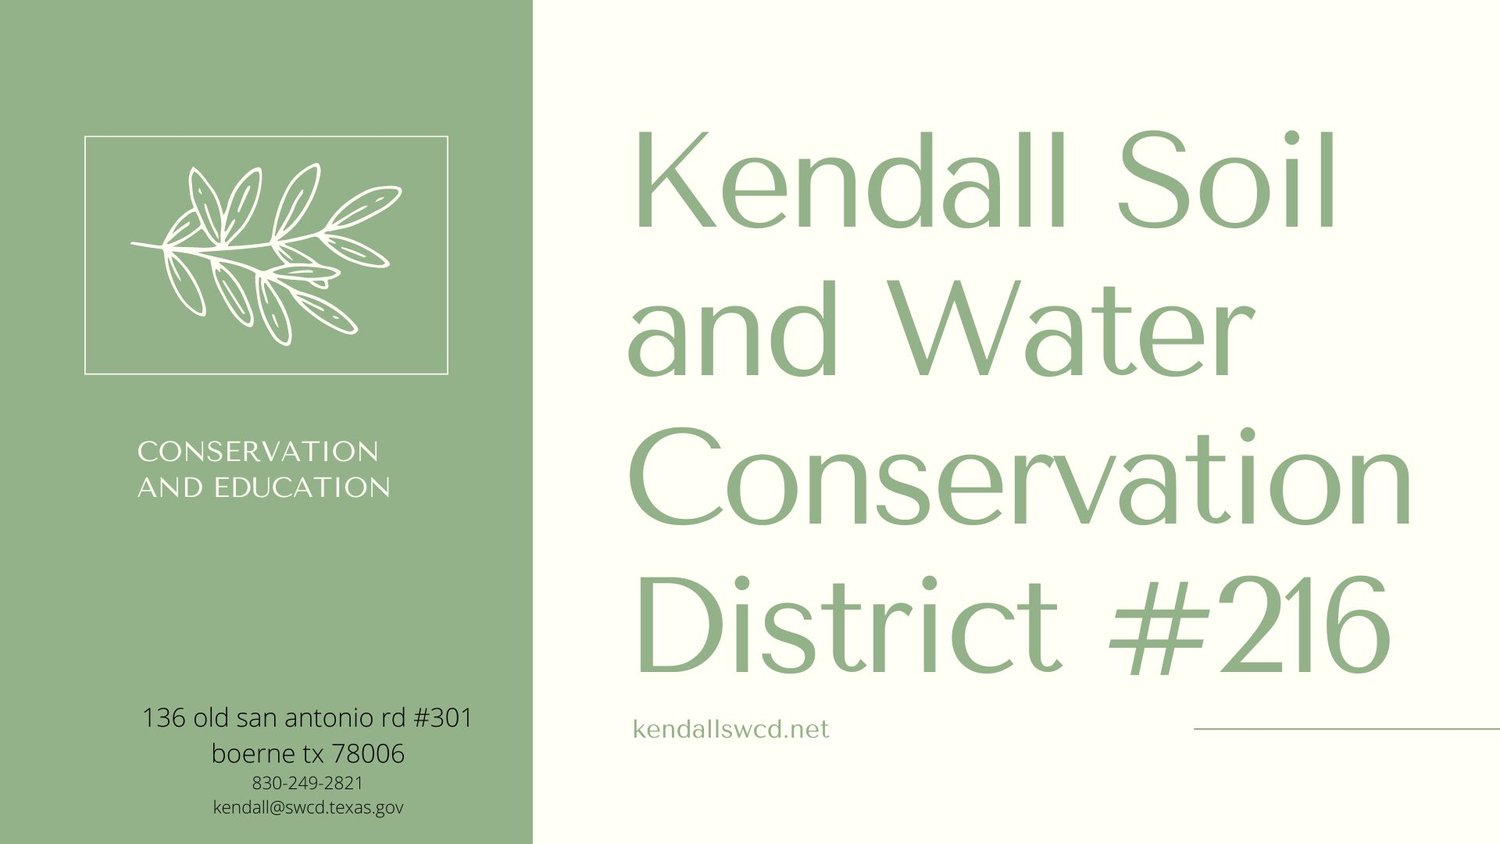 KENDALL SOIL AND WATER CONSERVATION DISTRICT